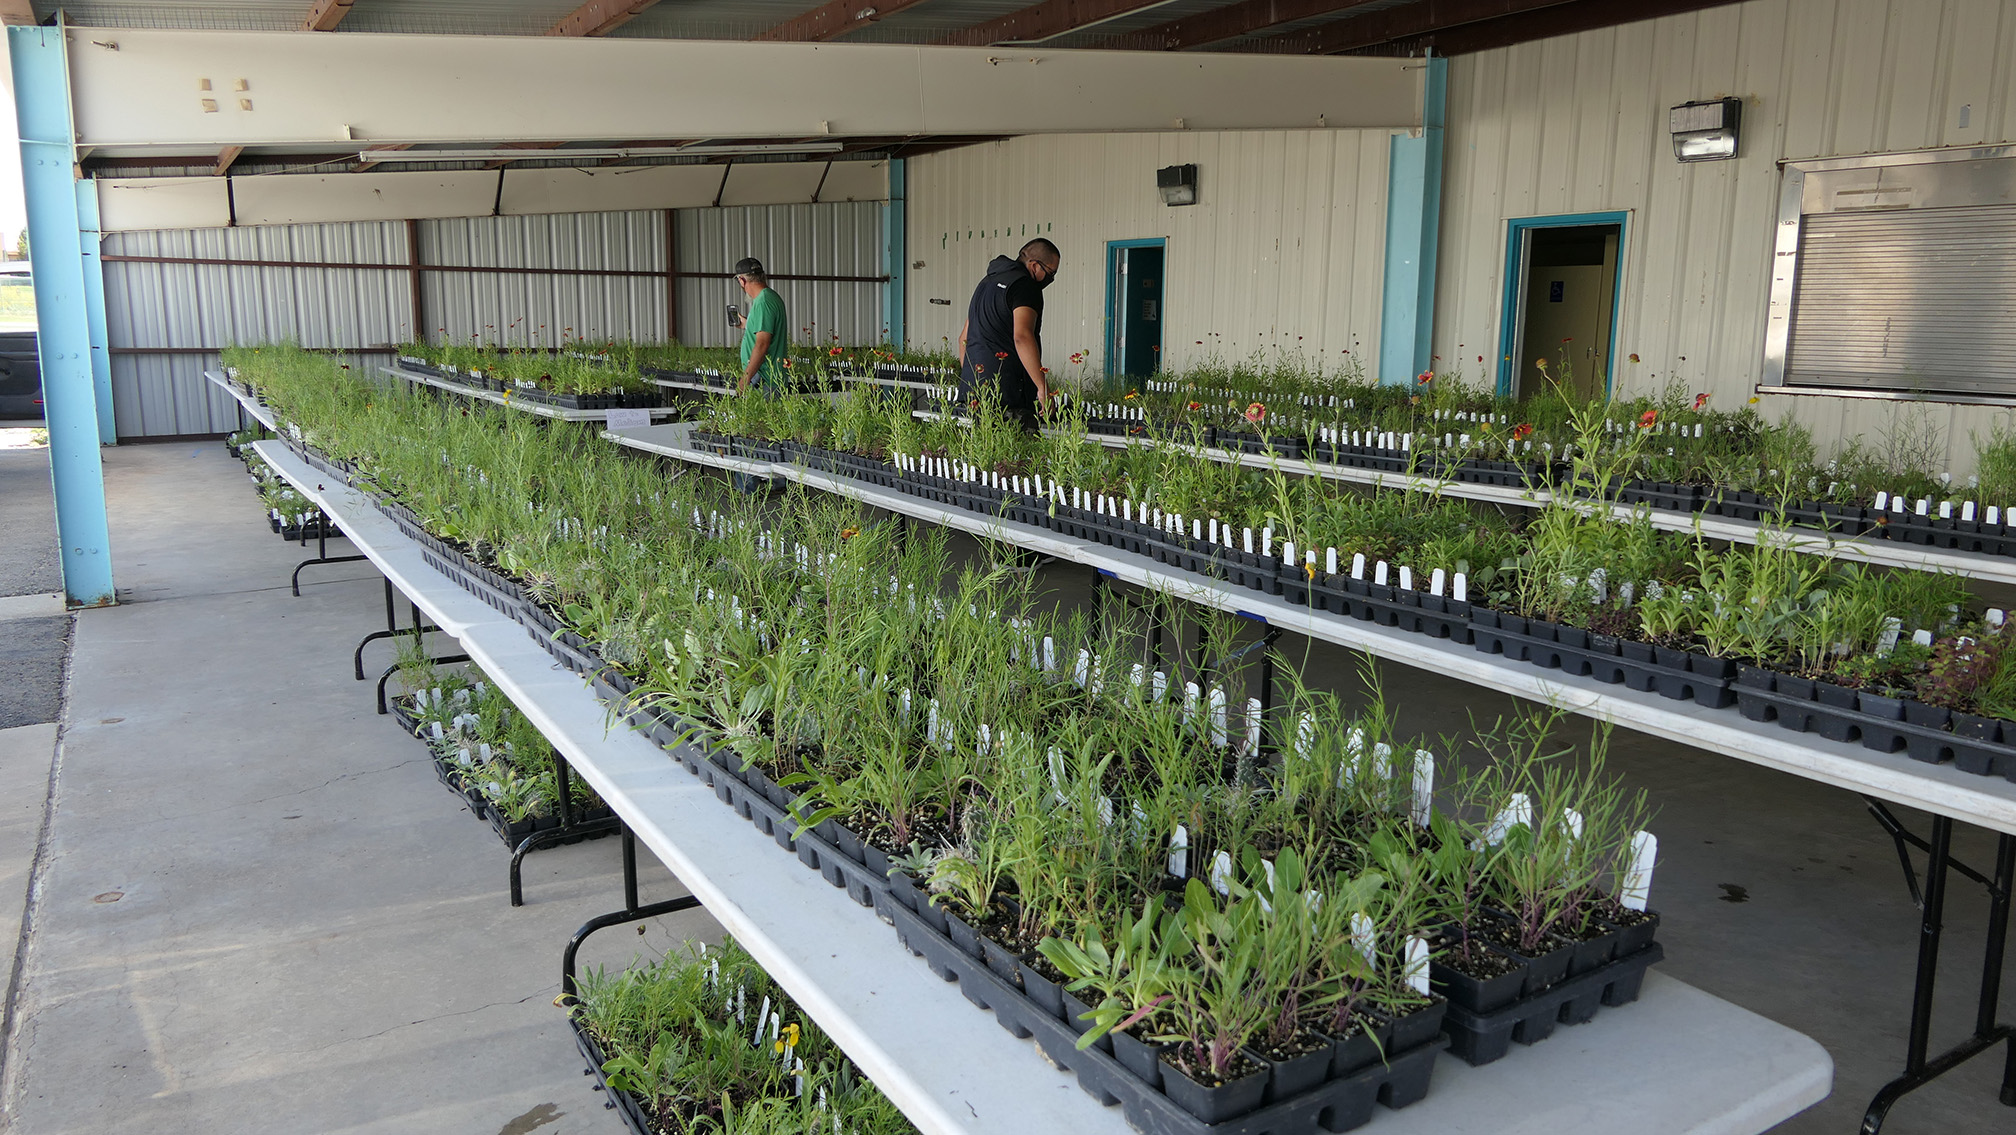 A photograph showing thousands of small plants in trays on tables waiting to be collected. The plants are mostly green leaves, but some have red flowers. The trays are black and each row of plants has a white label. There are four rows of tables stretching down the length of an open-sided barn. Two people, one in a black shirt, the other a green one, are looking at the plants.